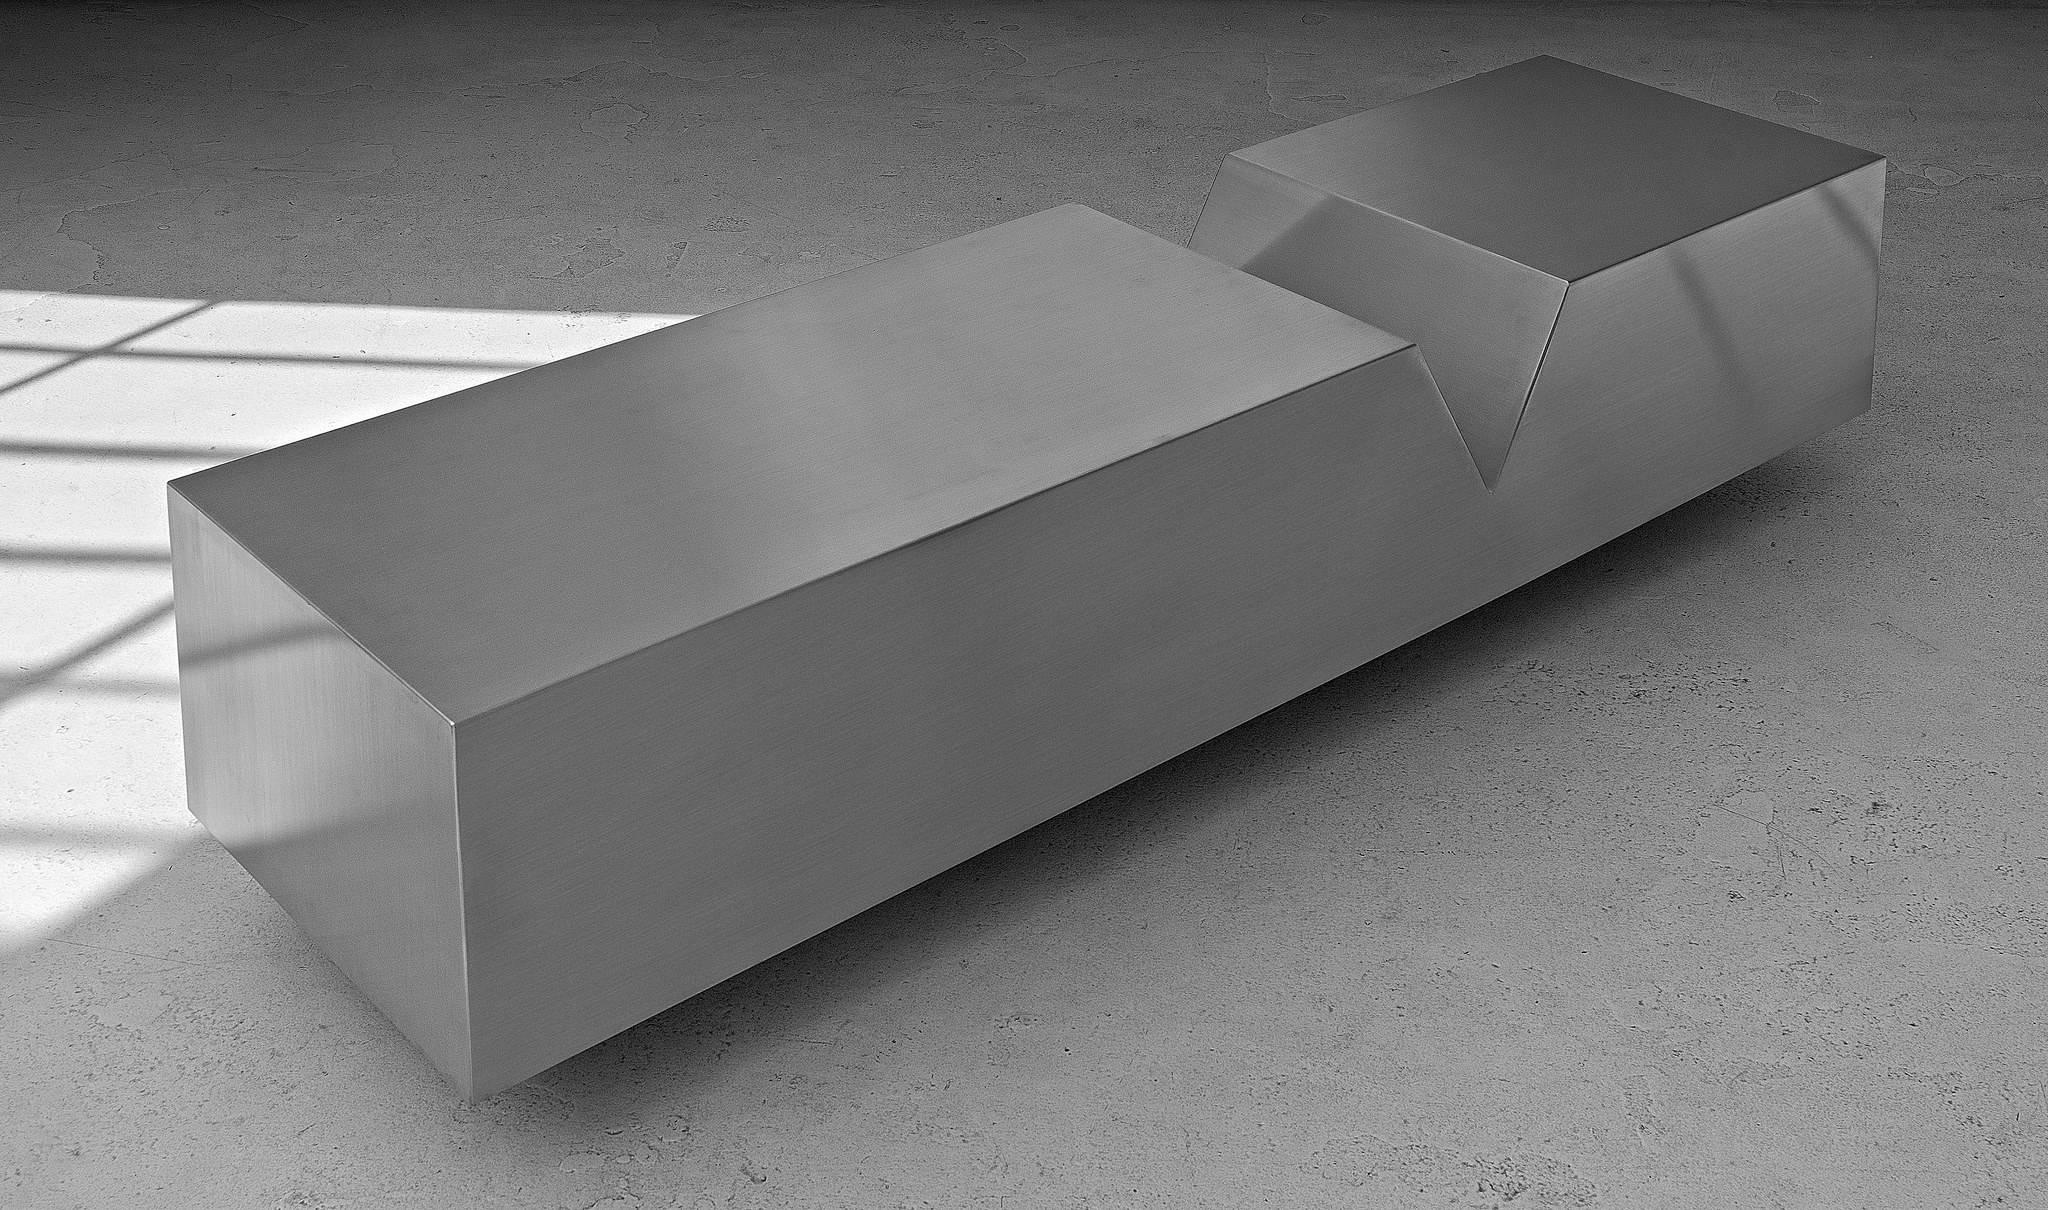 The revisteiro bench by Brazilian designer Zanini de Zanine is handcrafted in recycled EcoSteel stainless. 
Limited edition of 100. Each piece is individually numbered and certified.